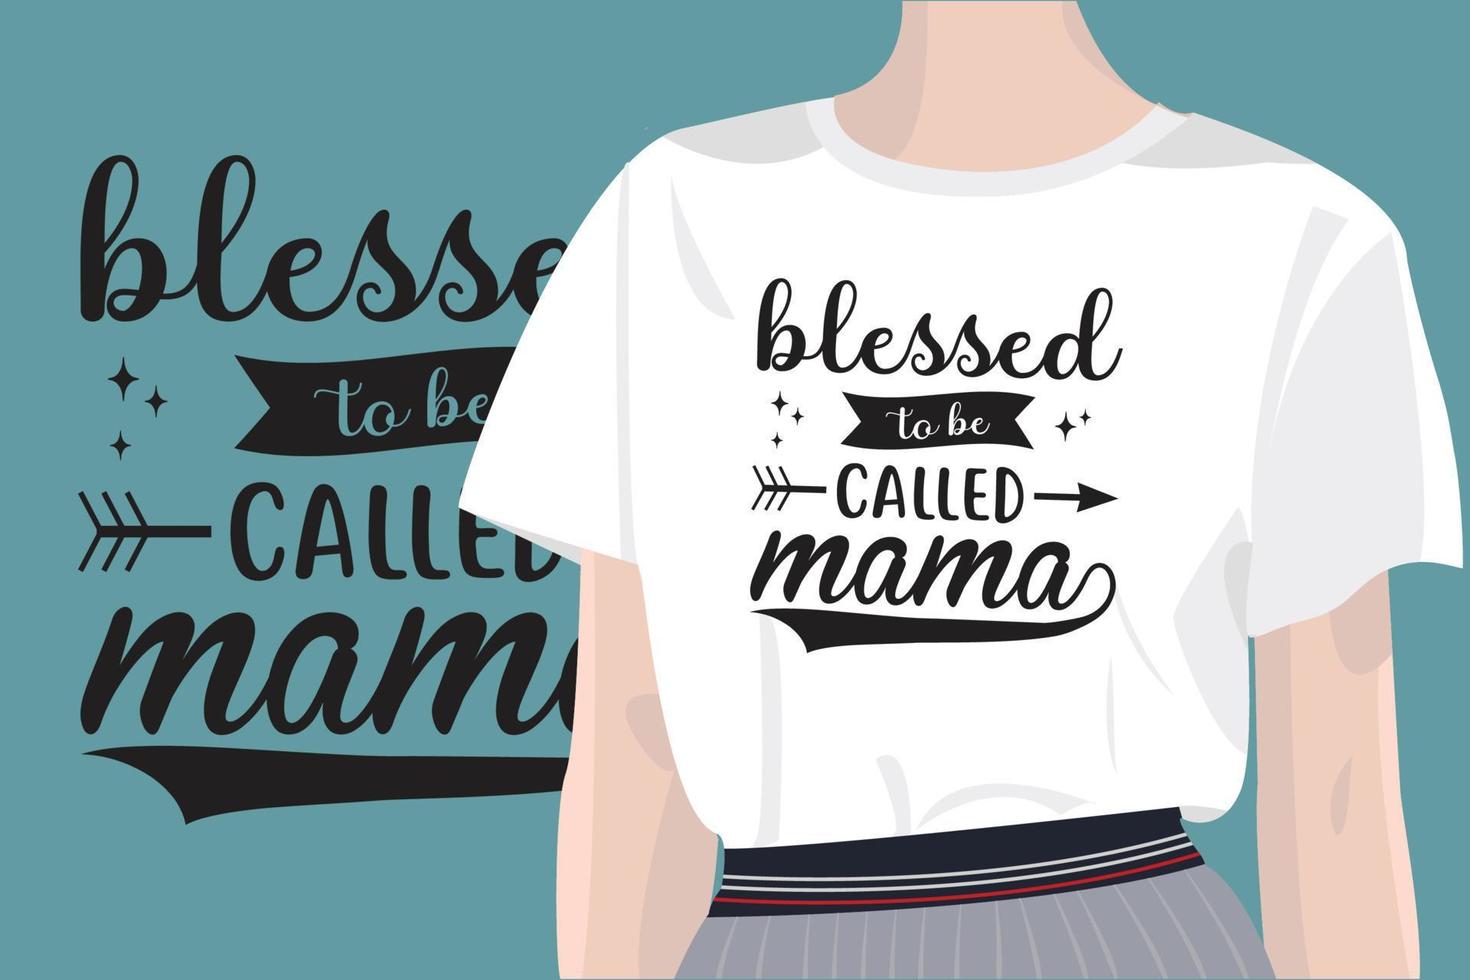 Blessed to be Called Mama mothers day quotes mom design with vector women t shirt mockup for t-shirts, cards, frame artwork, phone cases, bags, mugs, stickers, tumblers, print, etc